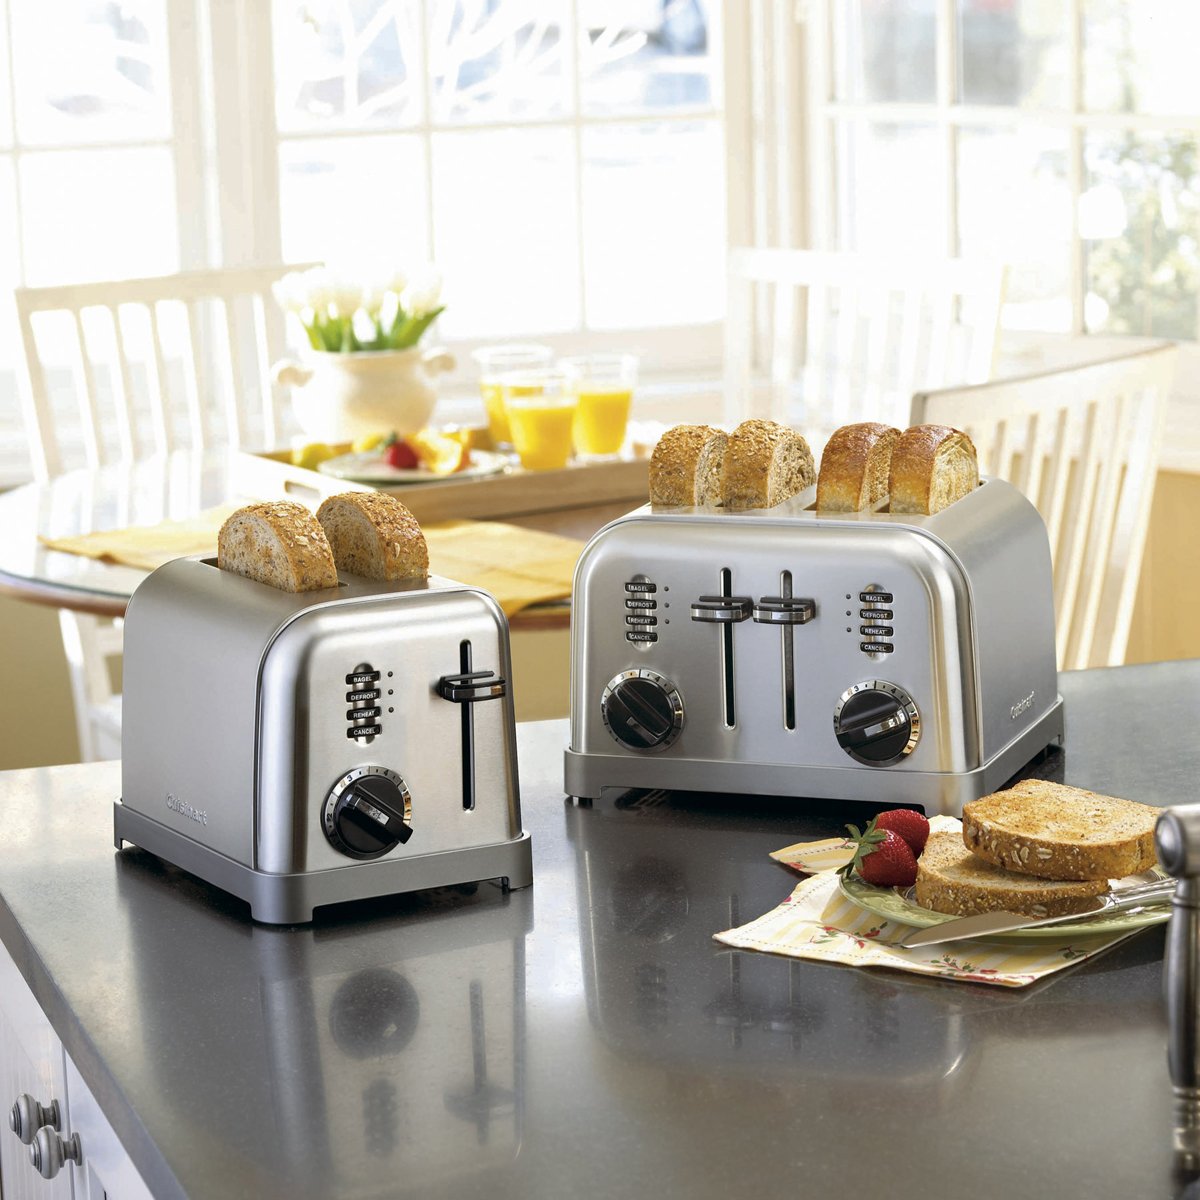 Cuisinart Brushed Stainless 4 Slice Classic Toaster - image 3 of 6